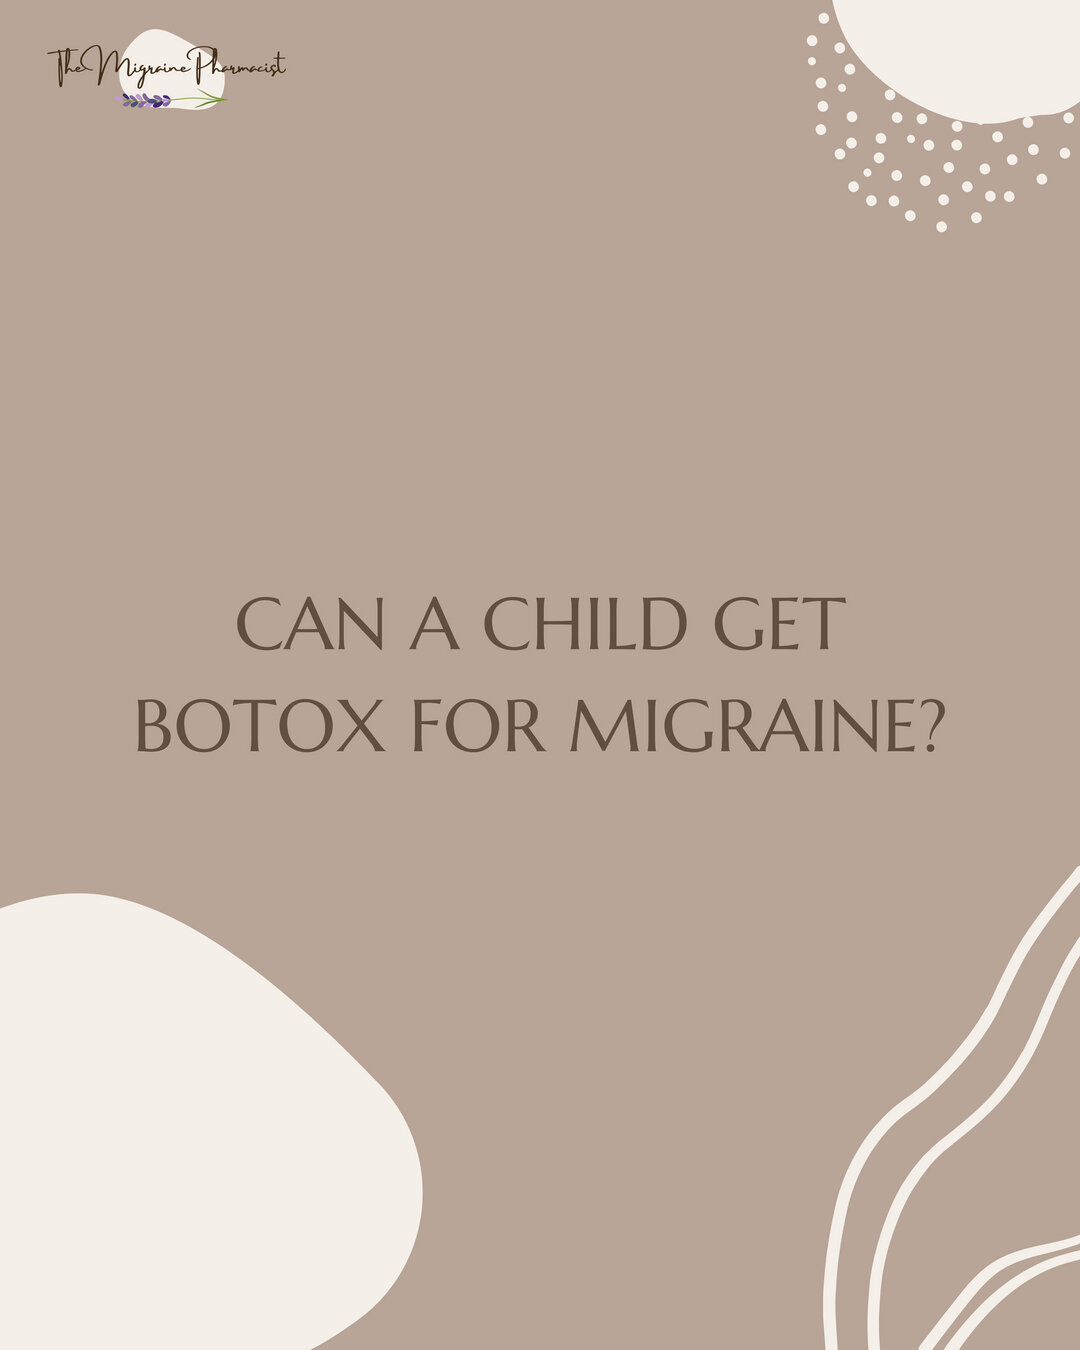 Botox&reg; is only effective for chronic migraine in adults. ​​​​​​​​
If your child has tried a few oral preventive medications for chronic migraine (15 or more migraine days per month) without benefit, Botox&reg; injections may be offered as an alte